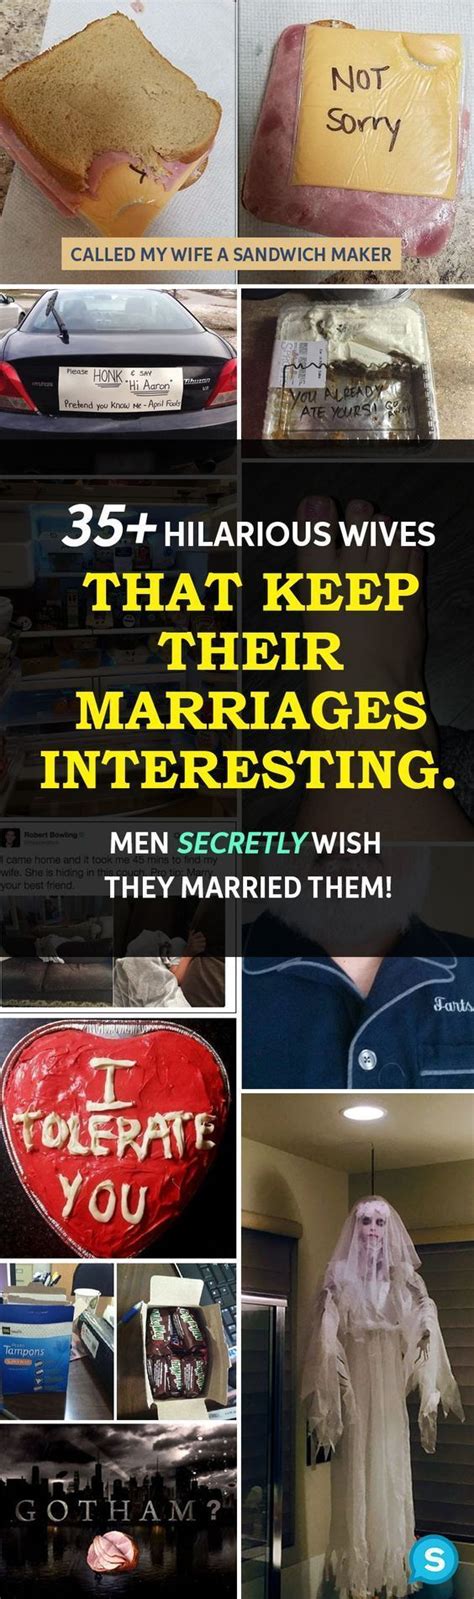 35 Hilarious Wives That Keep Their Marriages Interesting Men Secretly Wish They Married Them